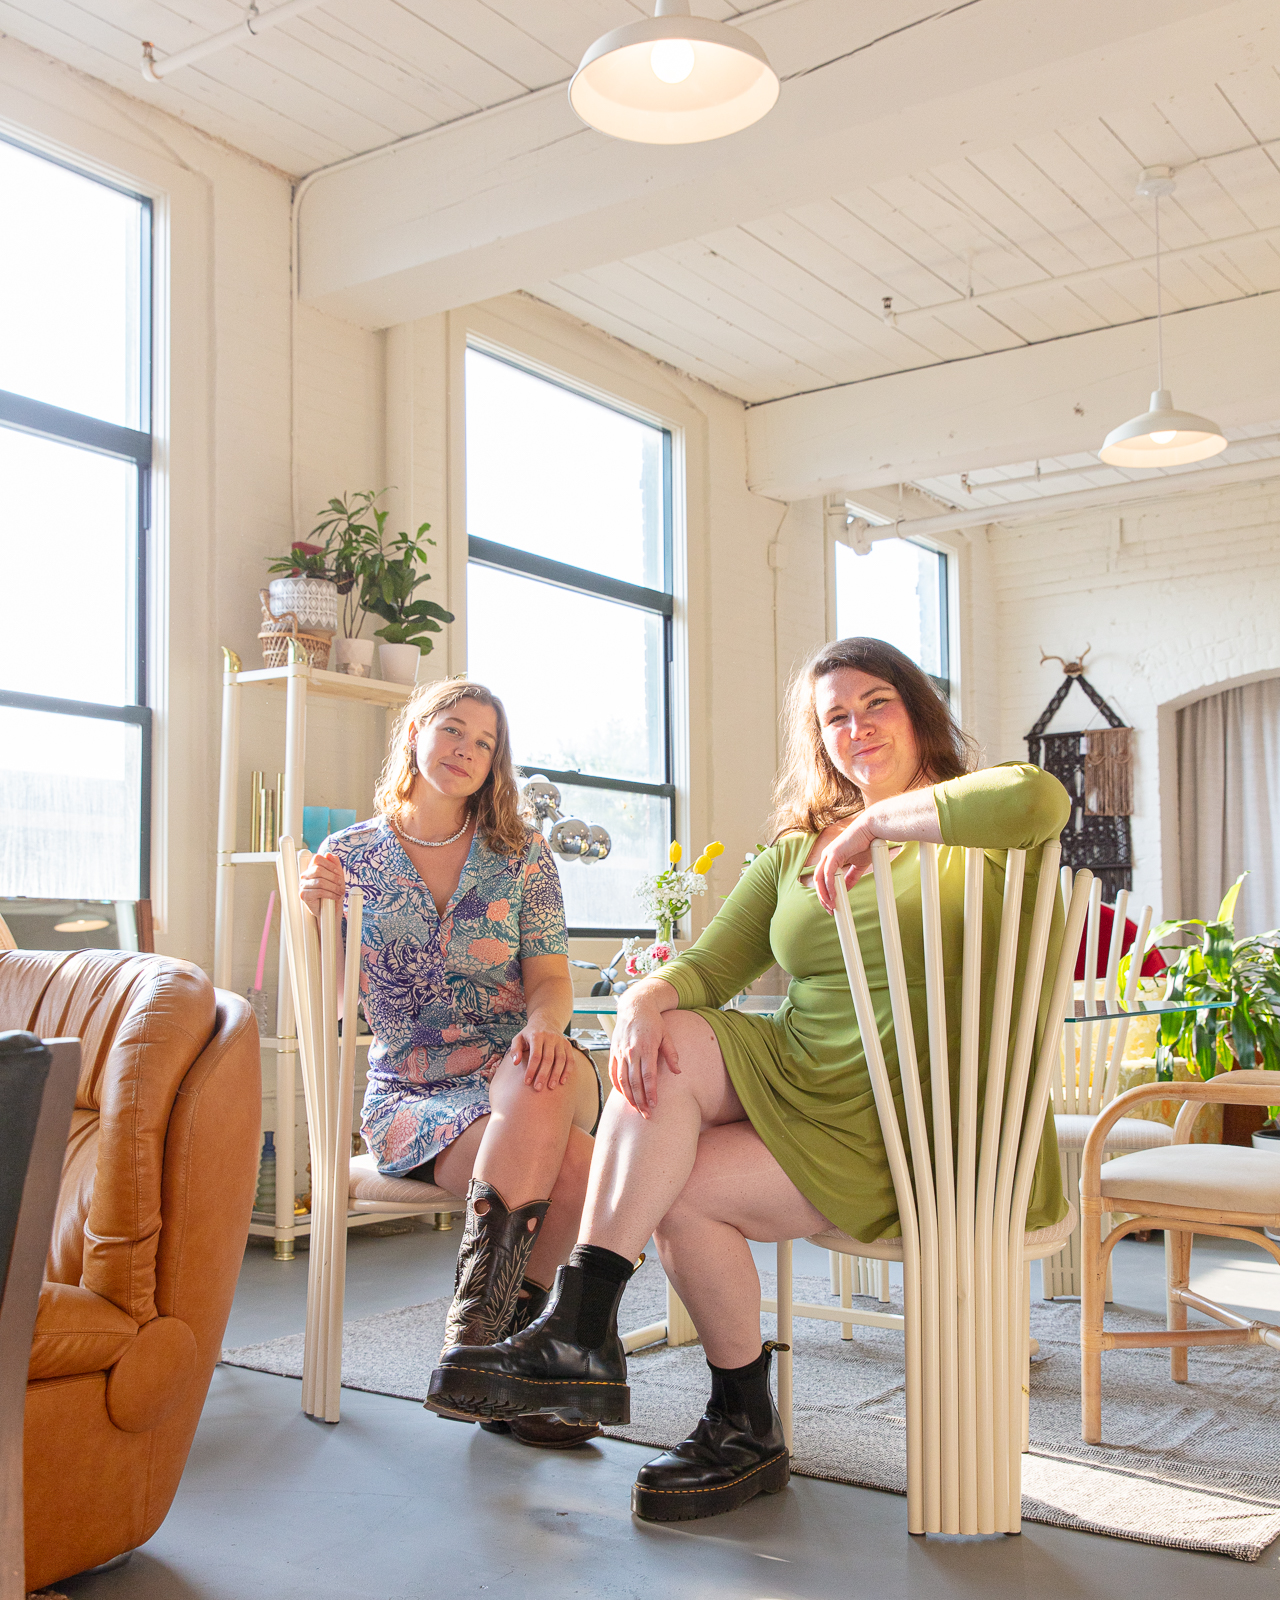 Co-founders of The Nest, in Providence, Charlotte von Meister and Danielle Sturm.